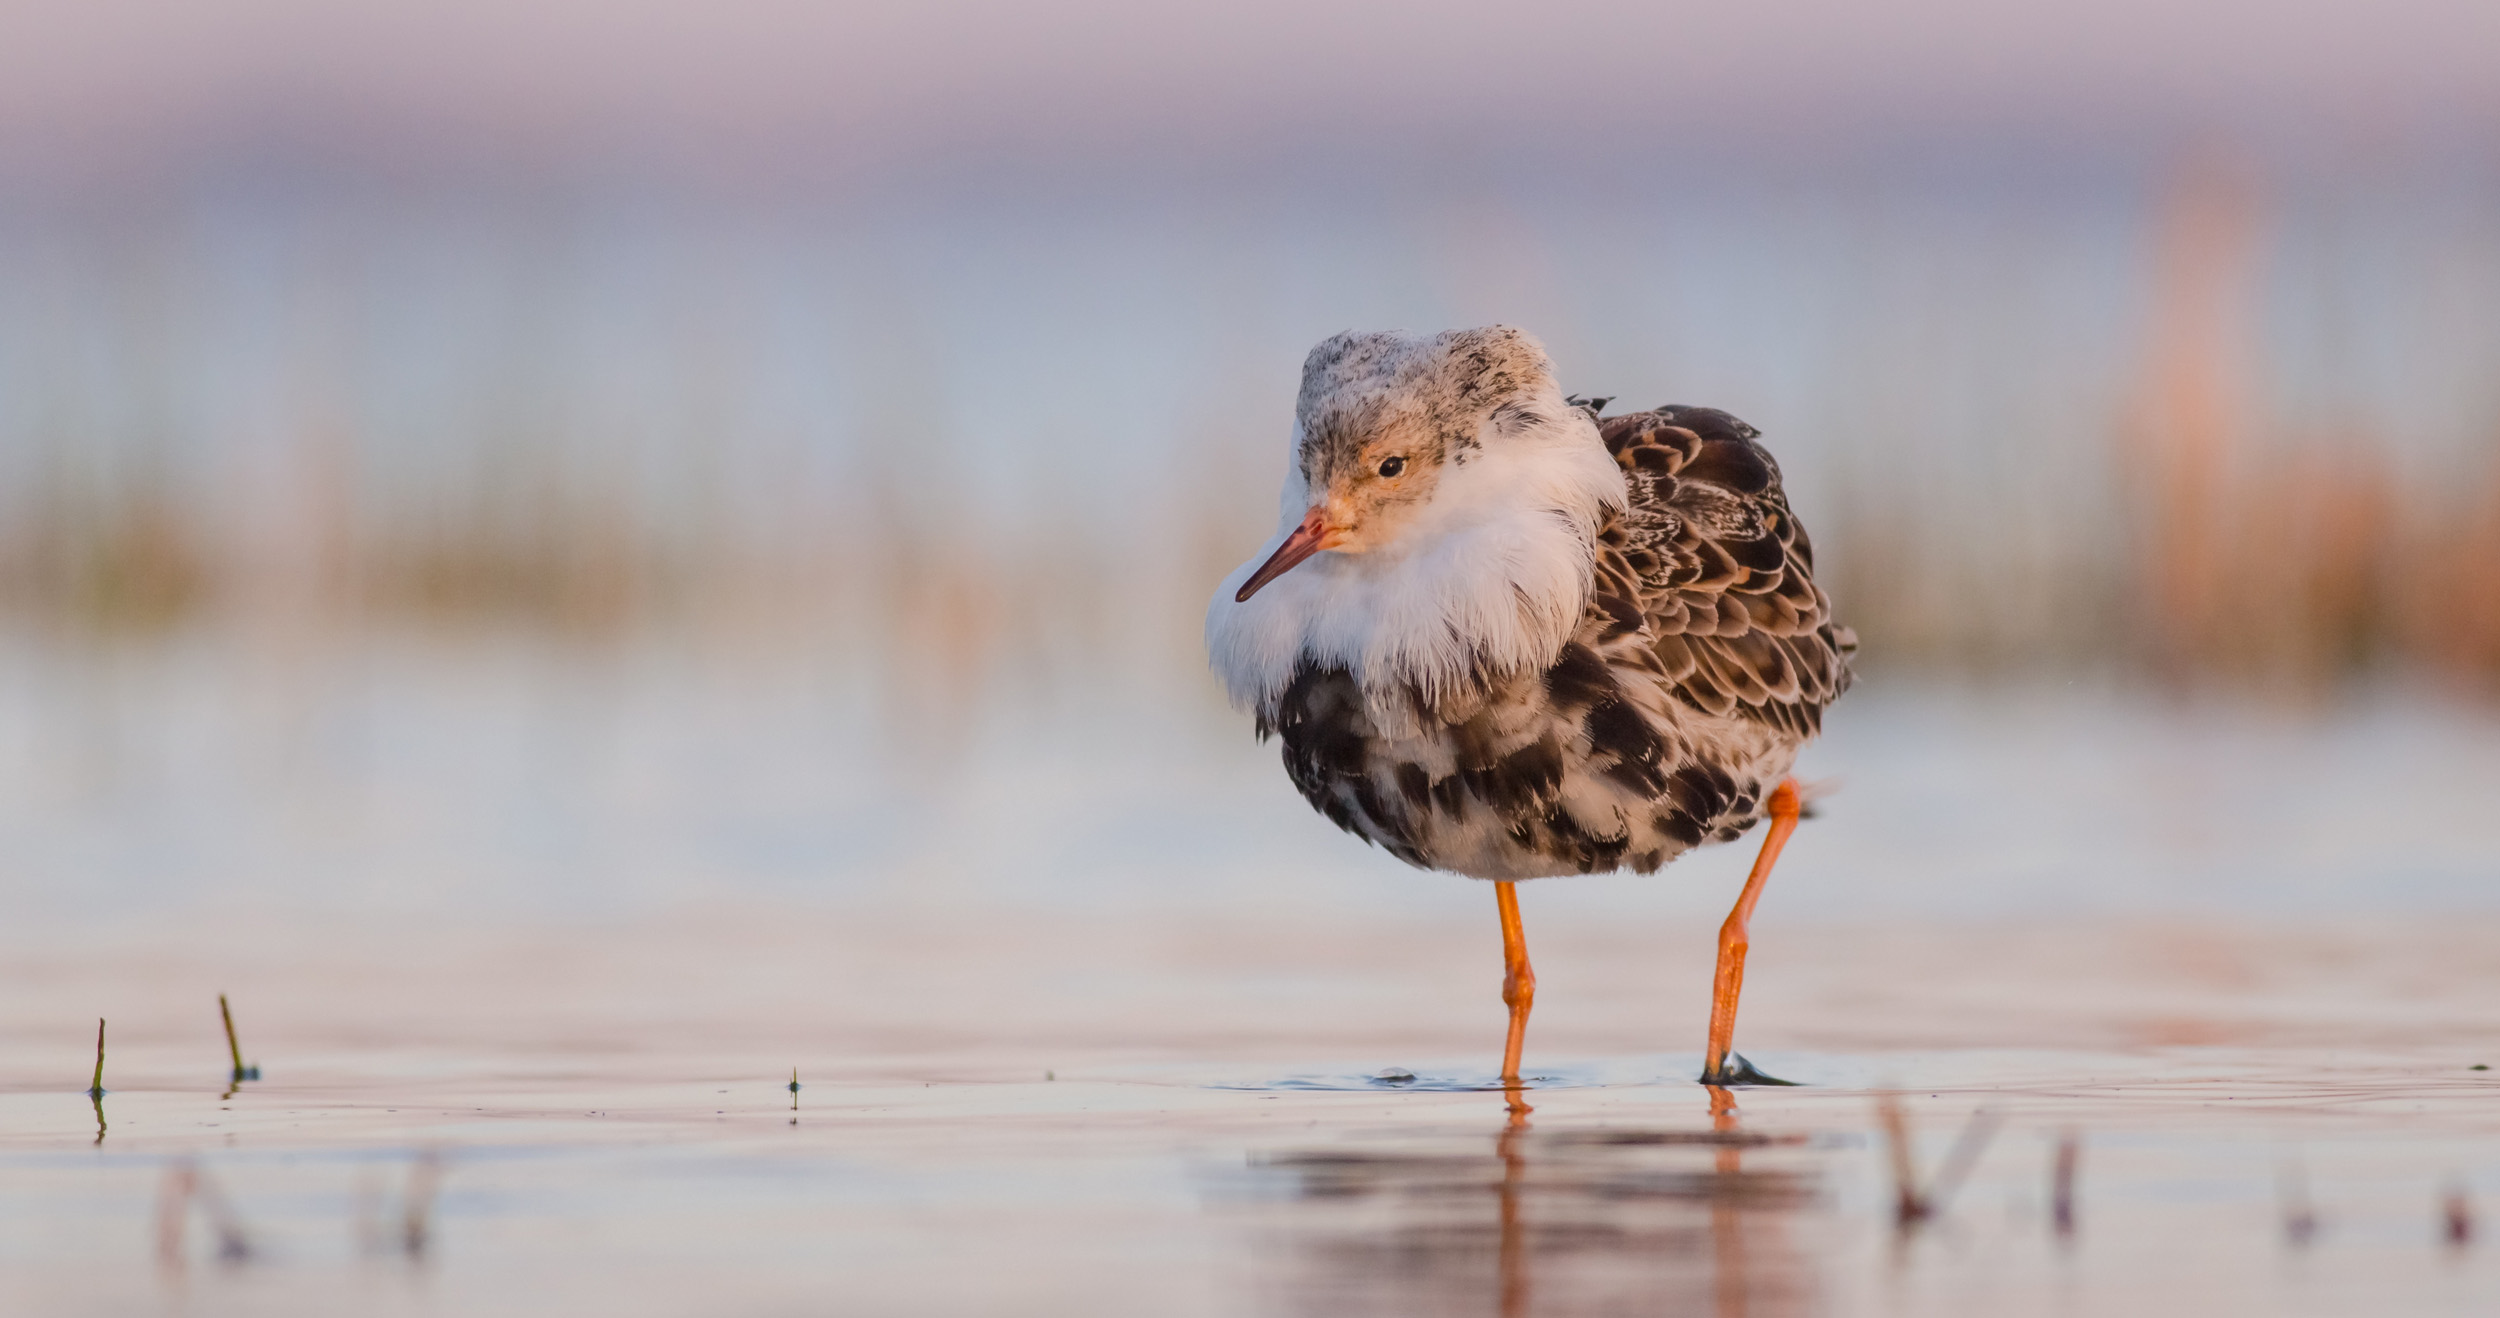 A male Ruff with ruffed up feathers walking in shallow waters.